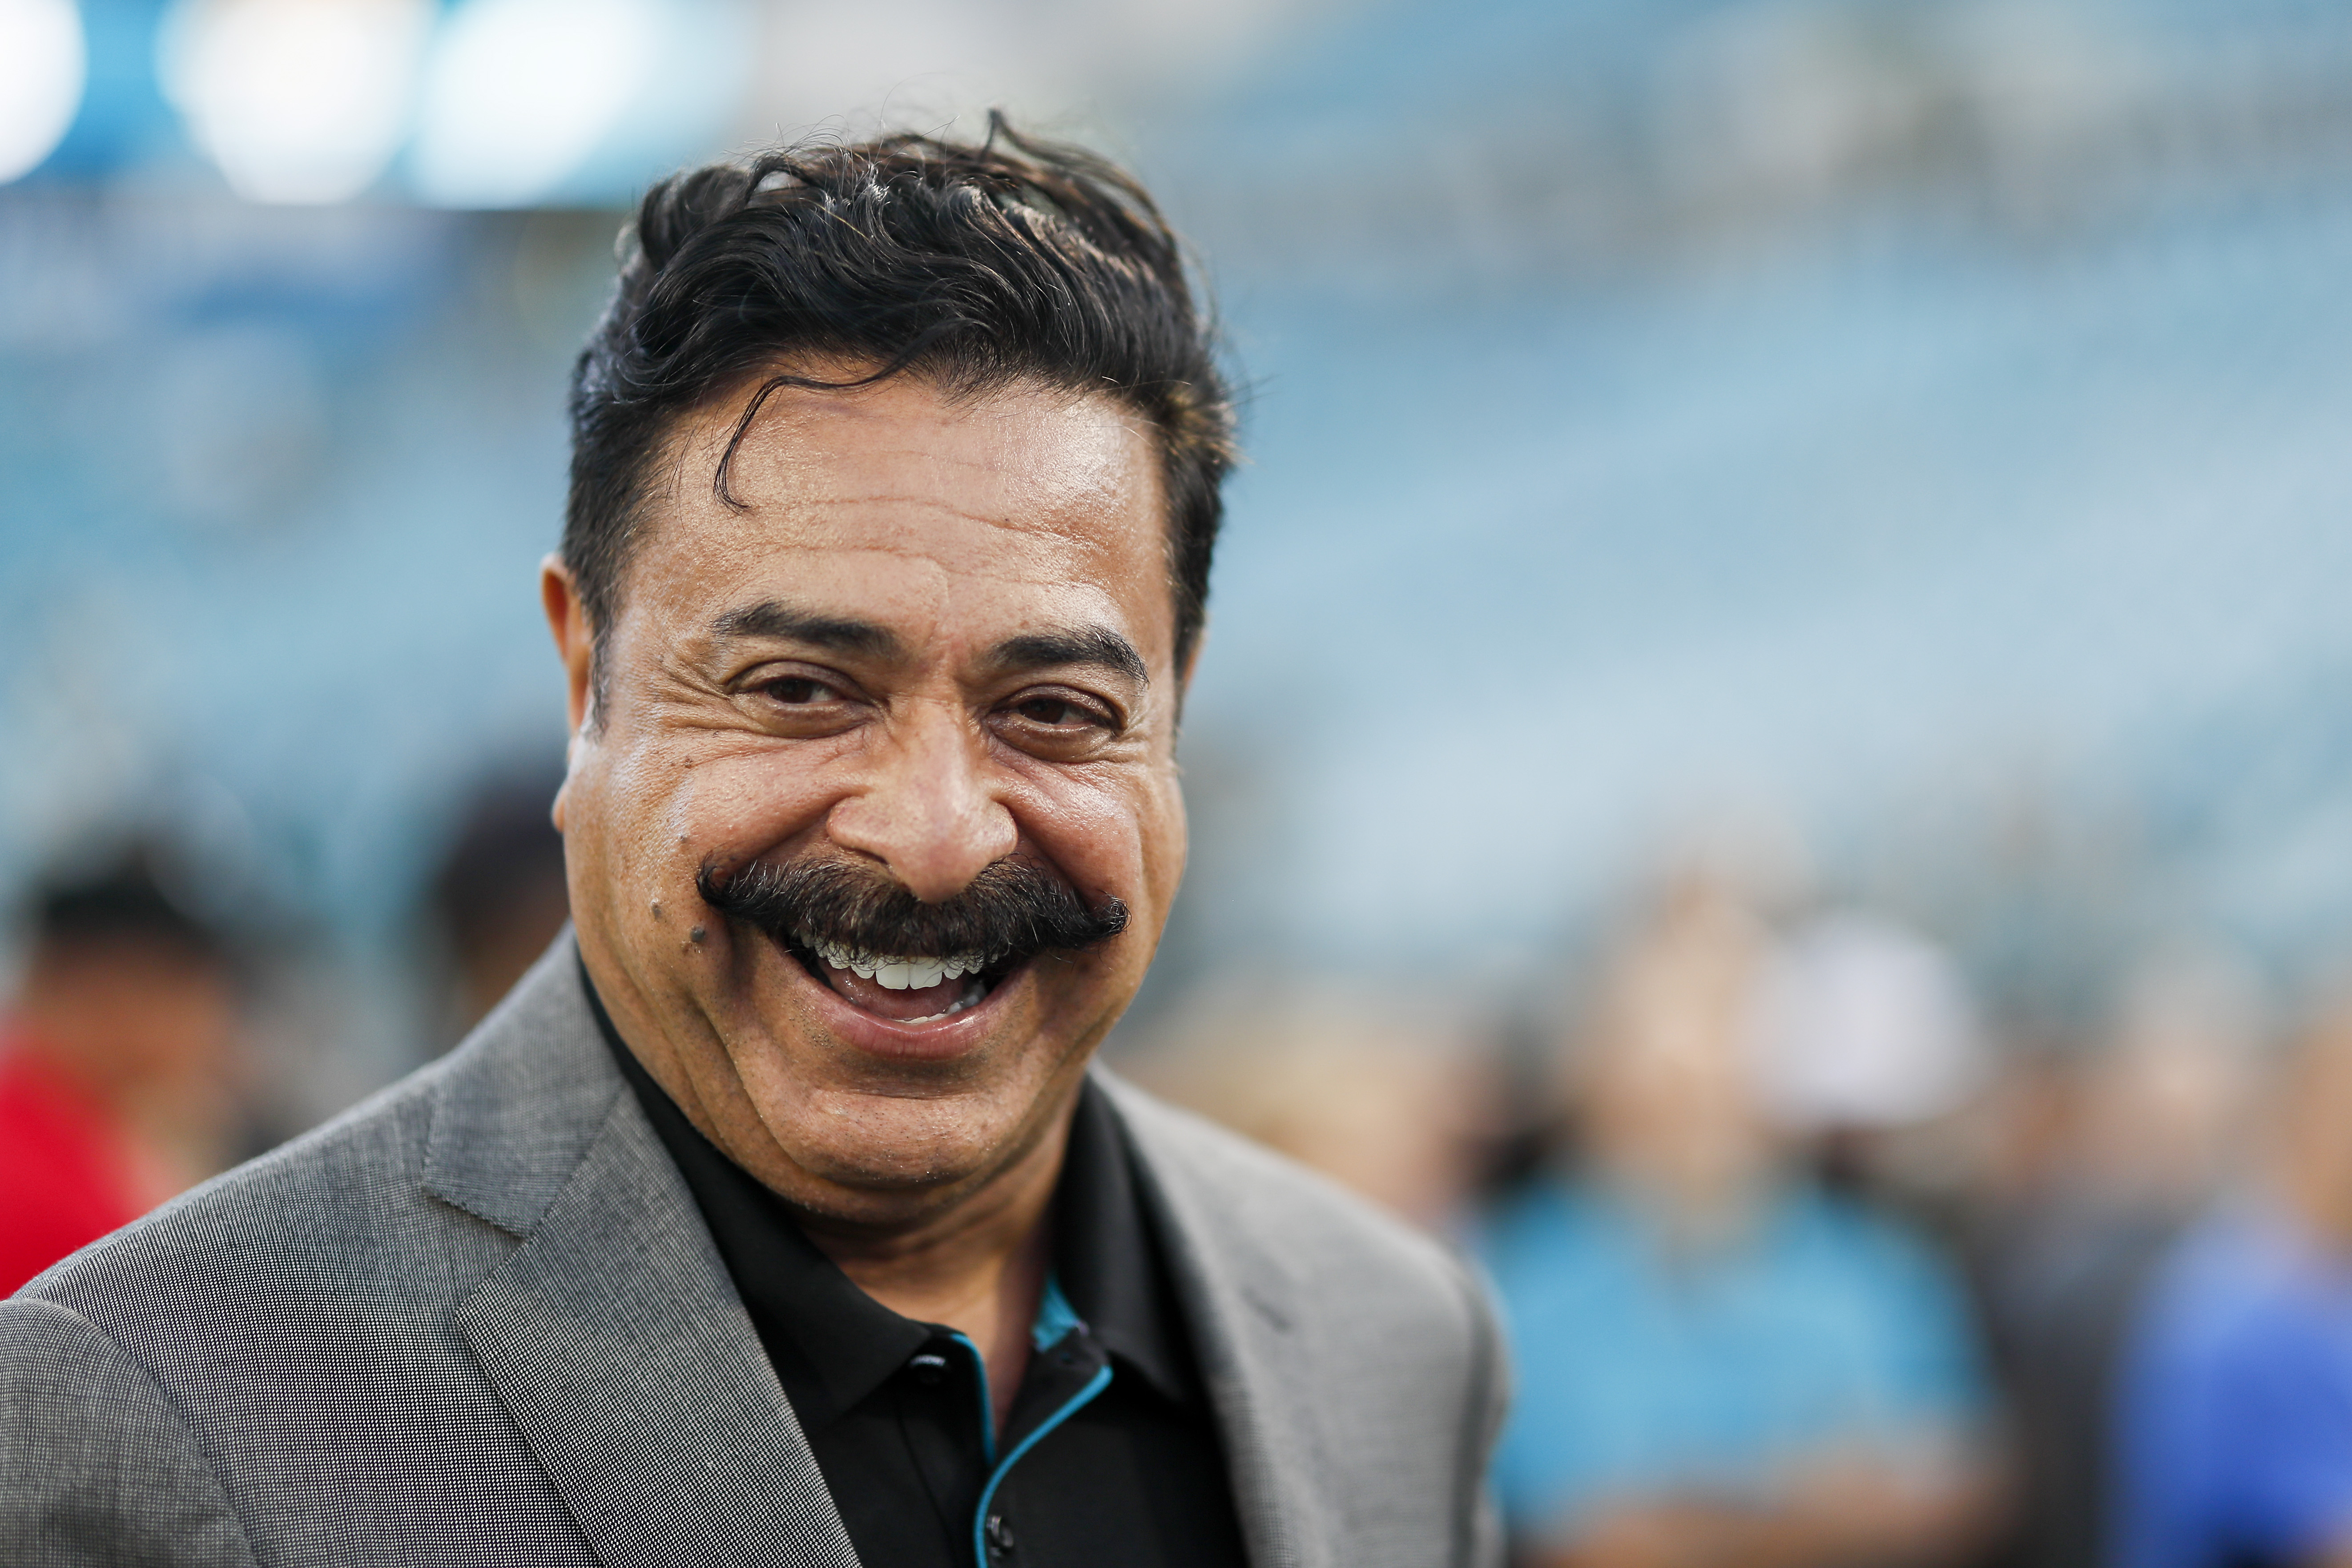 Shad Khan looks on before the start of a game against the Tennessee Titans at TIAA Bank Field on September 19, 2019, in Jacksonville, Florida. | Source: Getty Images